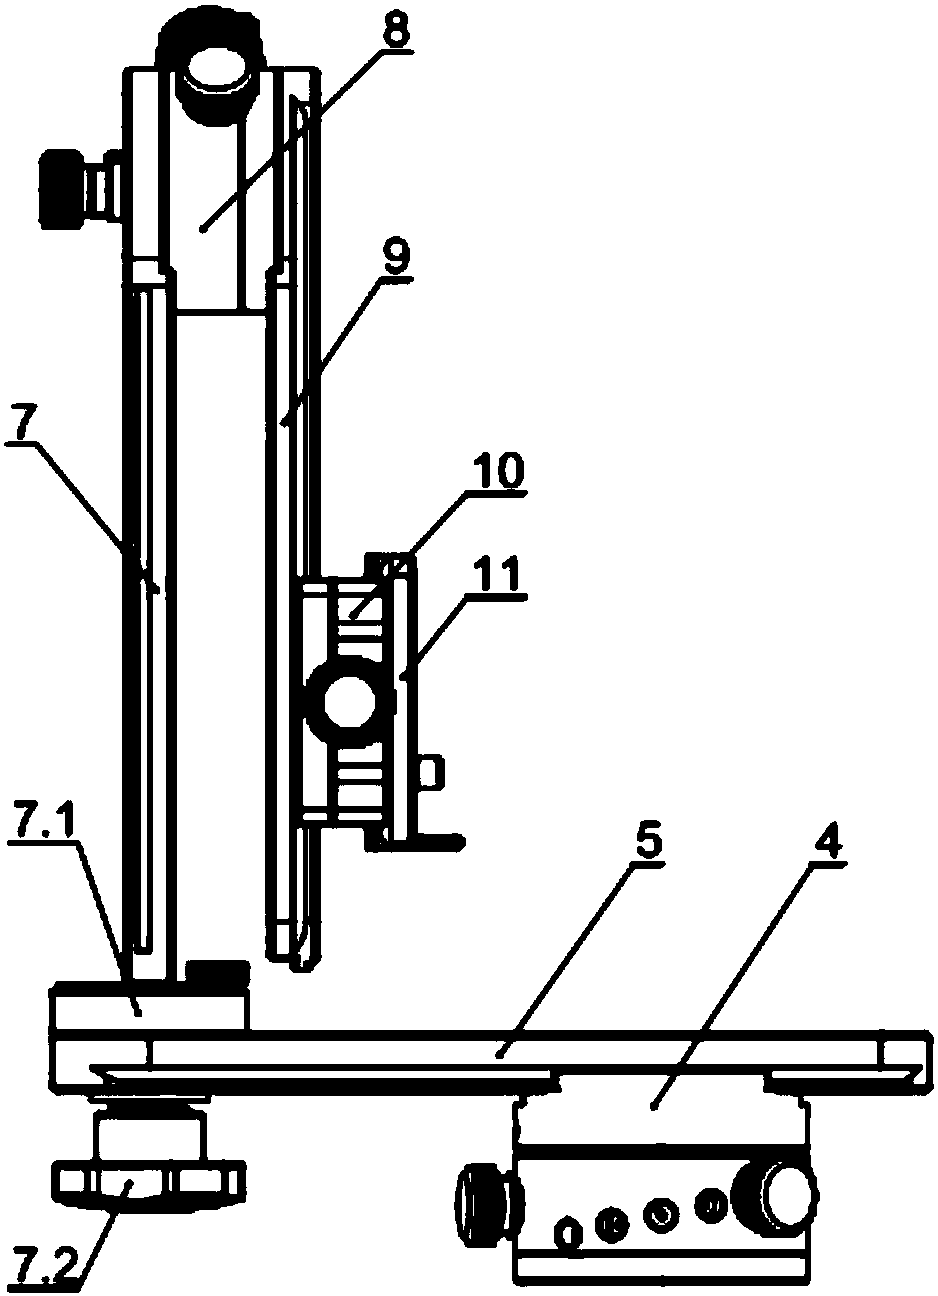 Multi-level indexing pan-tilt and its gear adjustment method